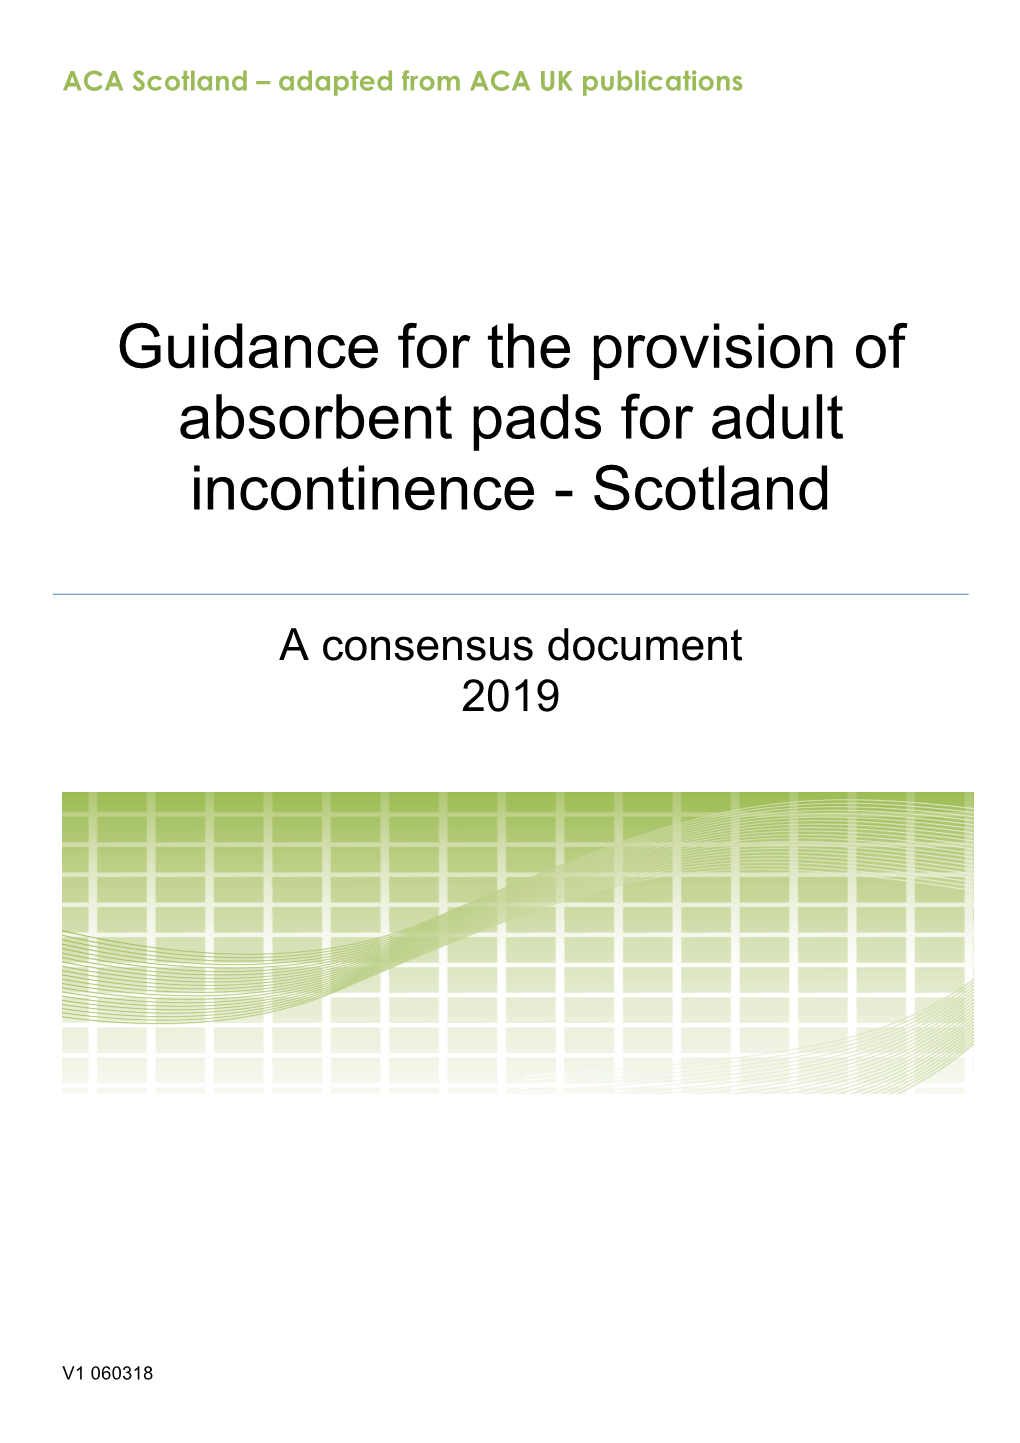 Guidance for the Provision of Absorbent Pads for Adult Incontinence - Scotland